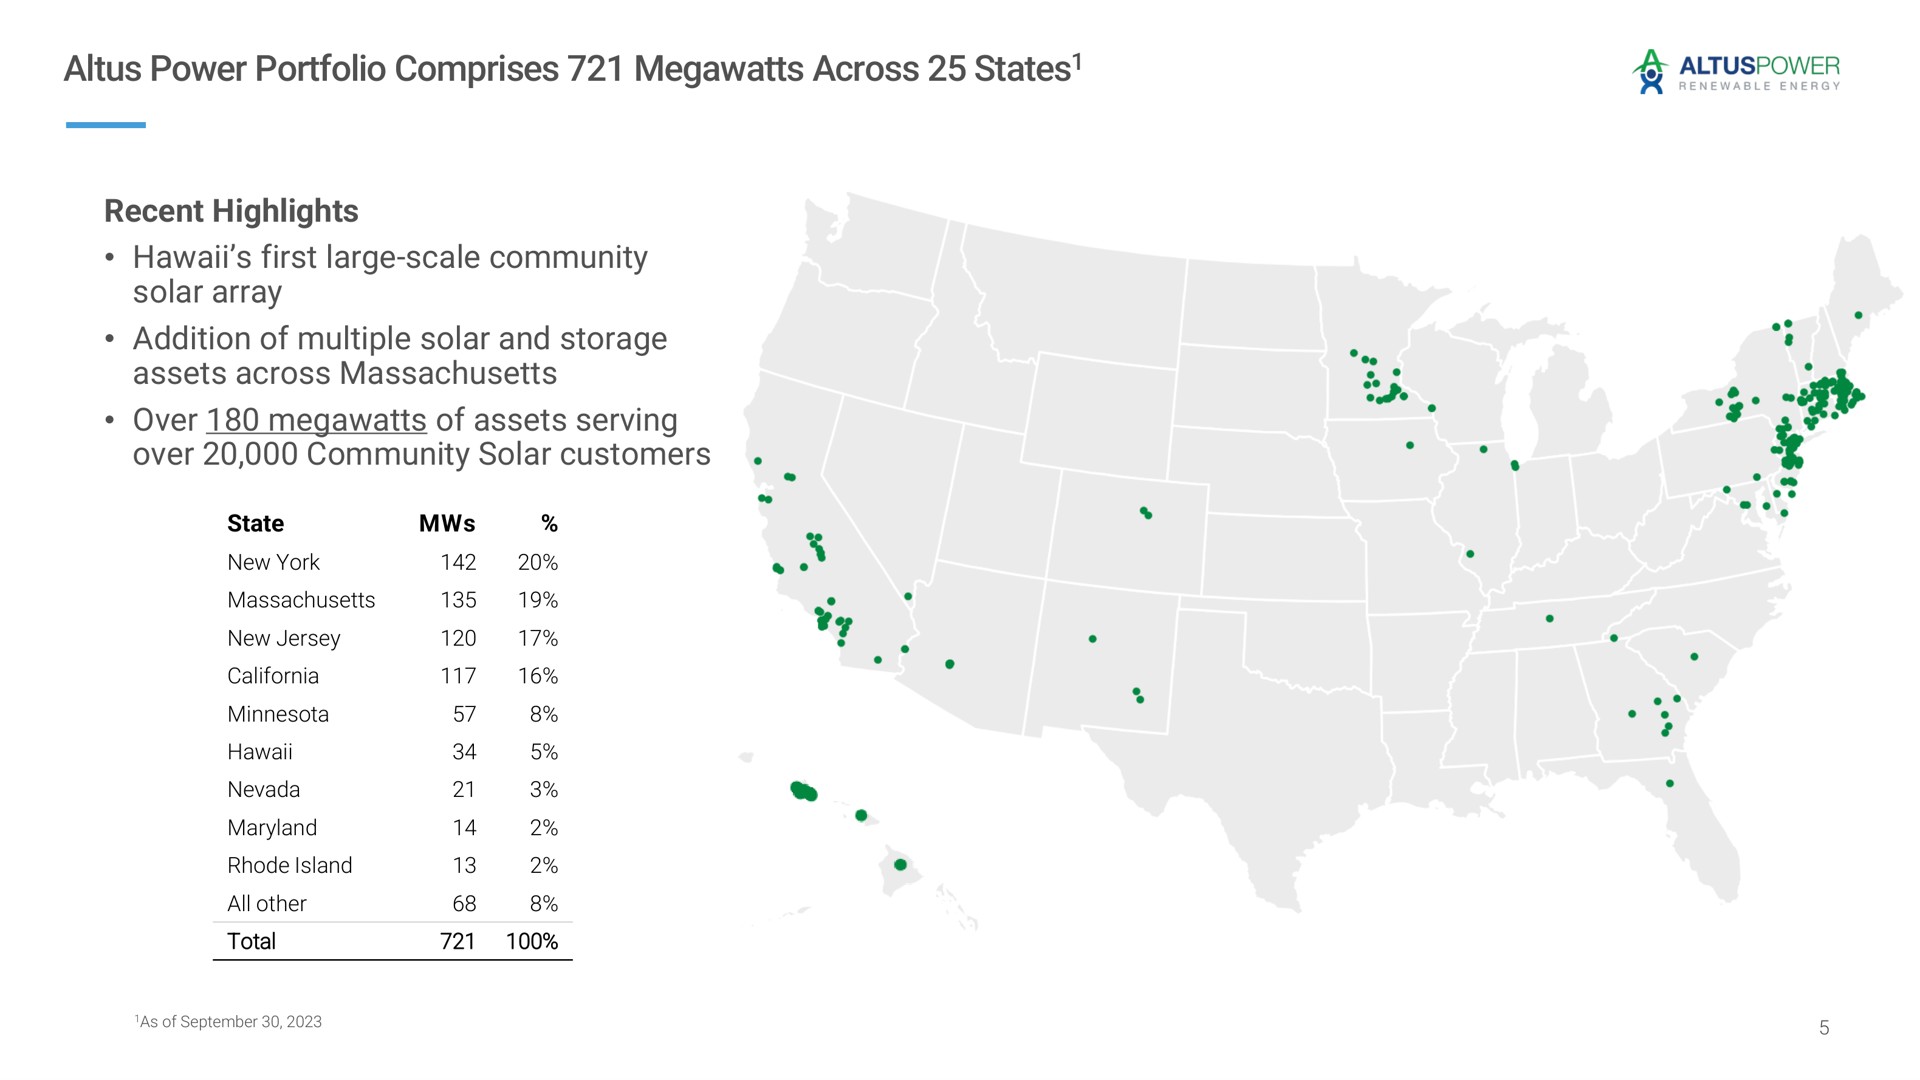 power portfolio comprises megawatts across states recent highlights first large scale community solar array addition of multiple solar and storage assets across over megawatts of assets serving over community solar customers states a | Altus Power